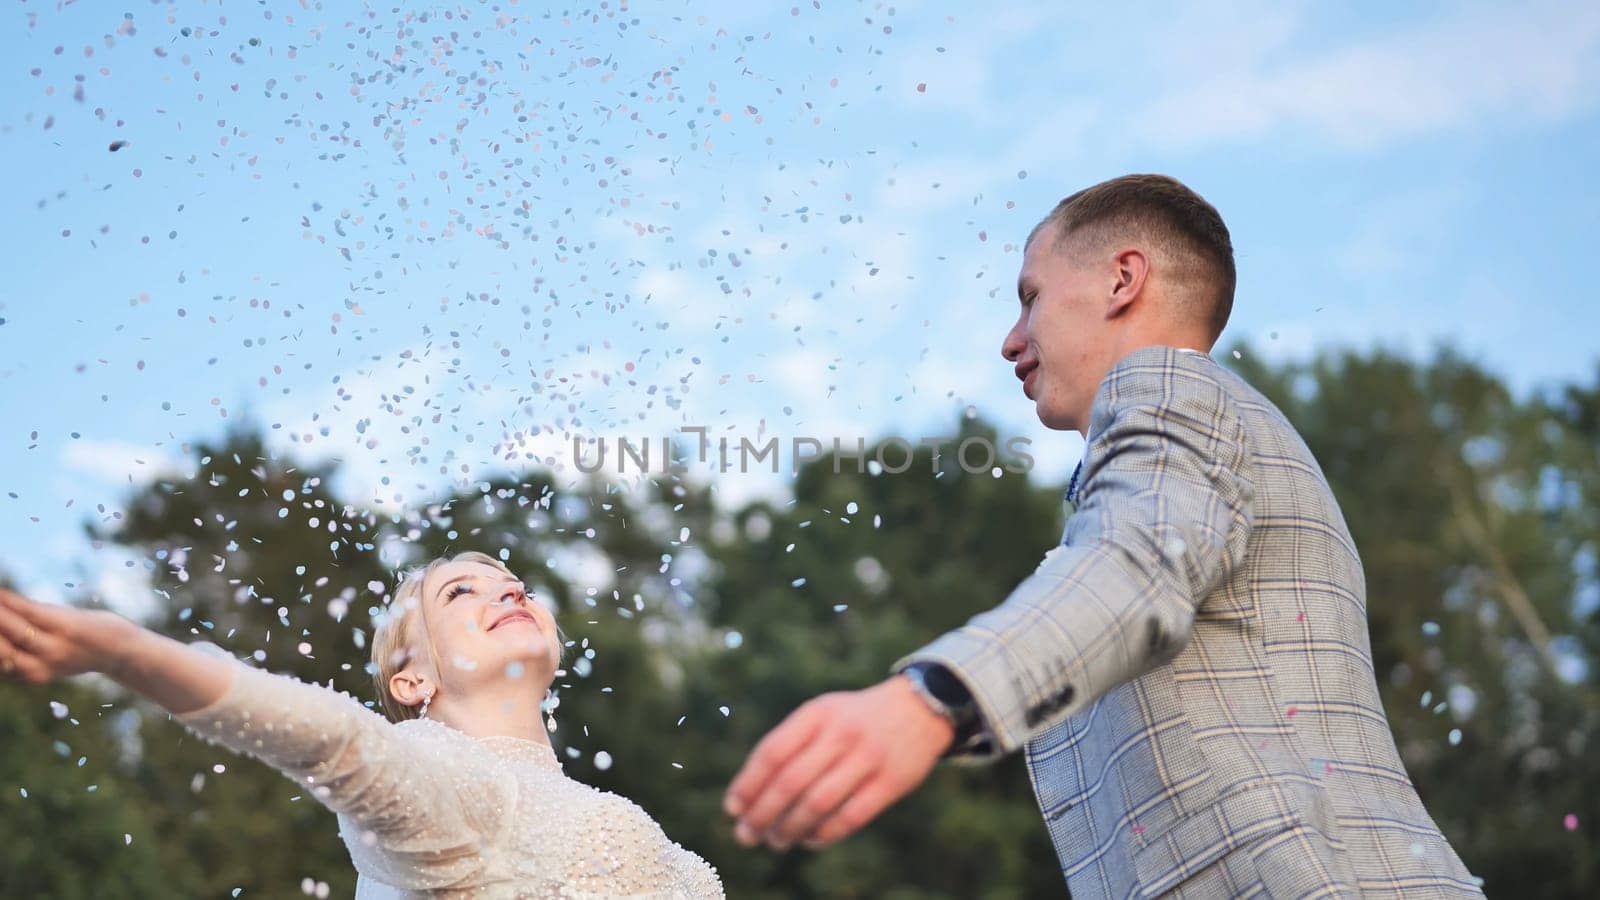 The bride and groom toss confetti above them and embrace. by DovidPro